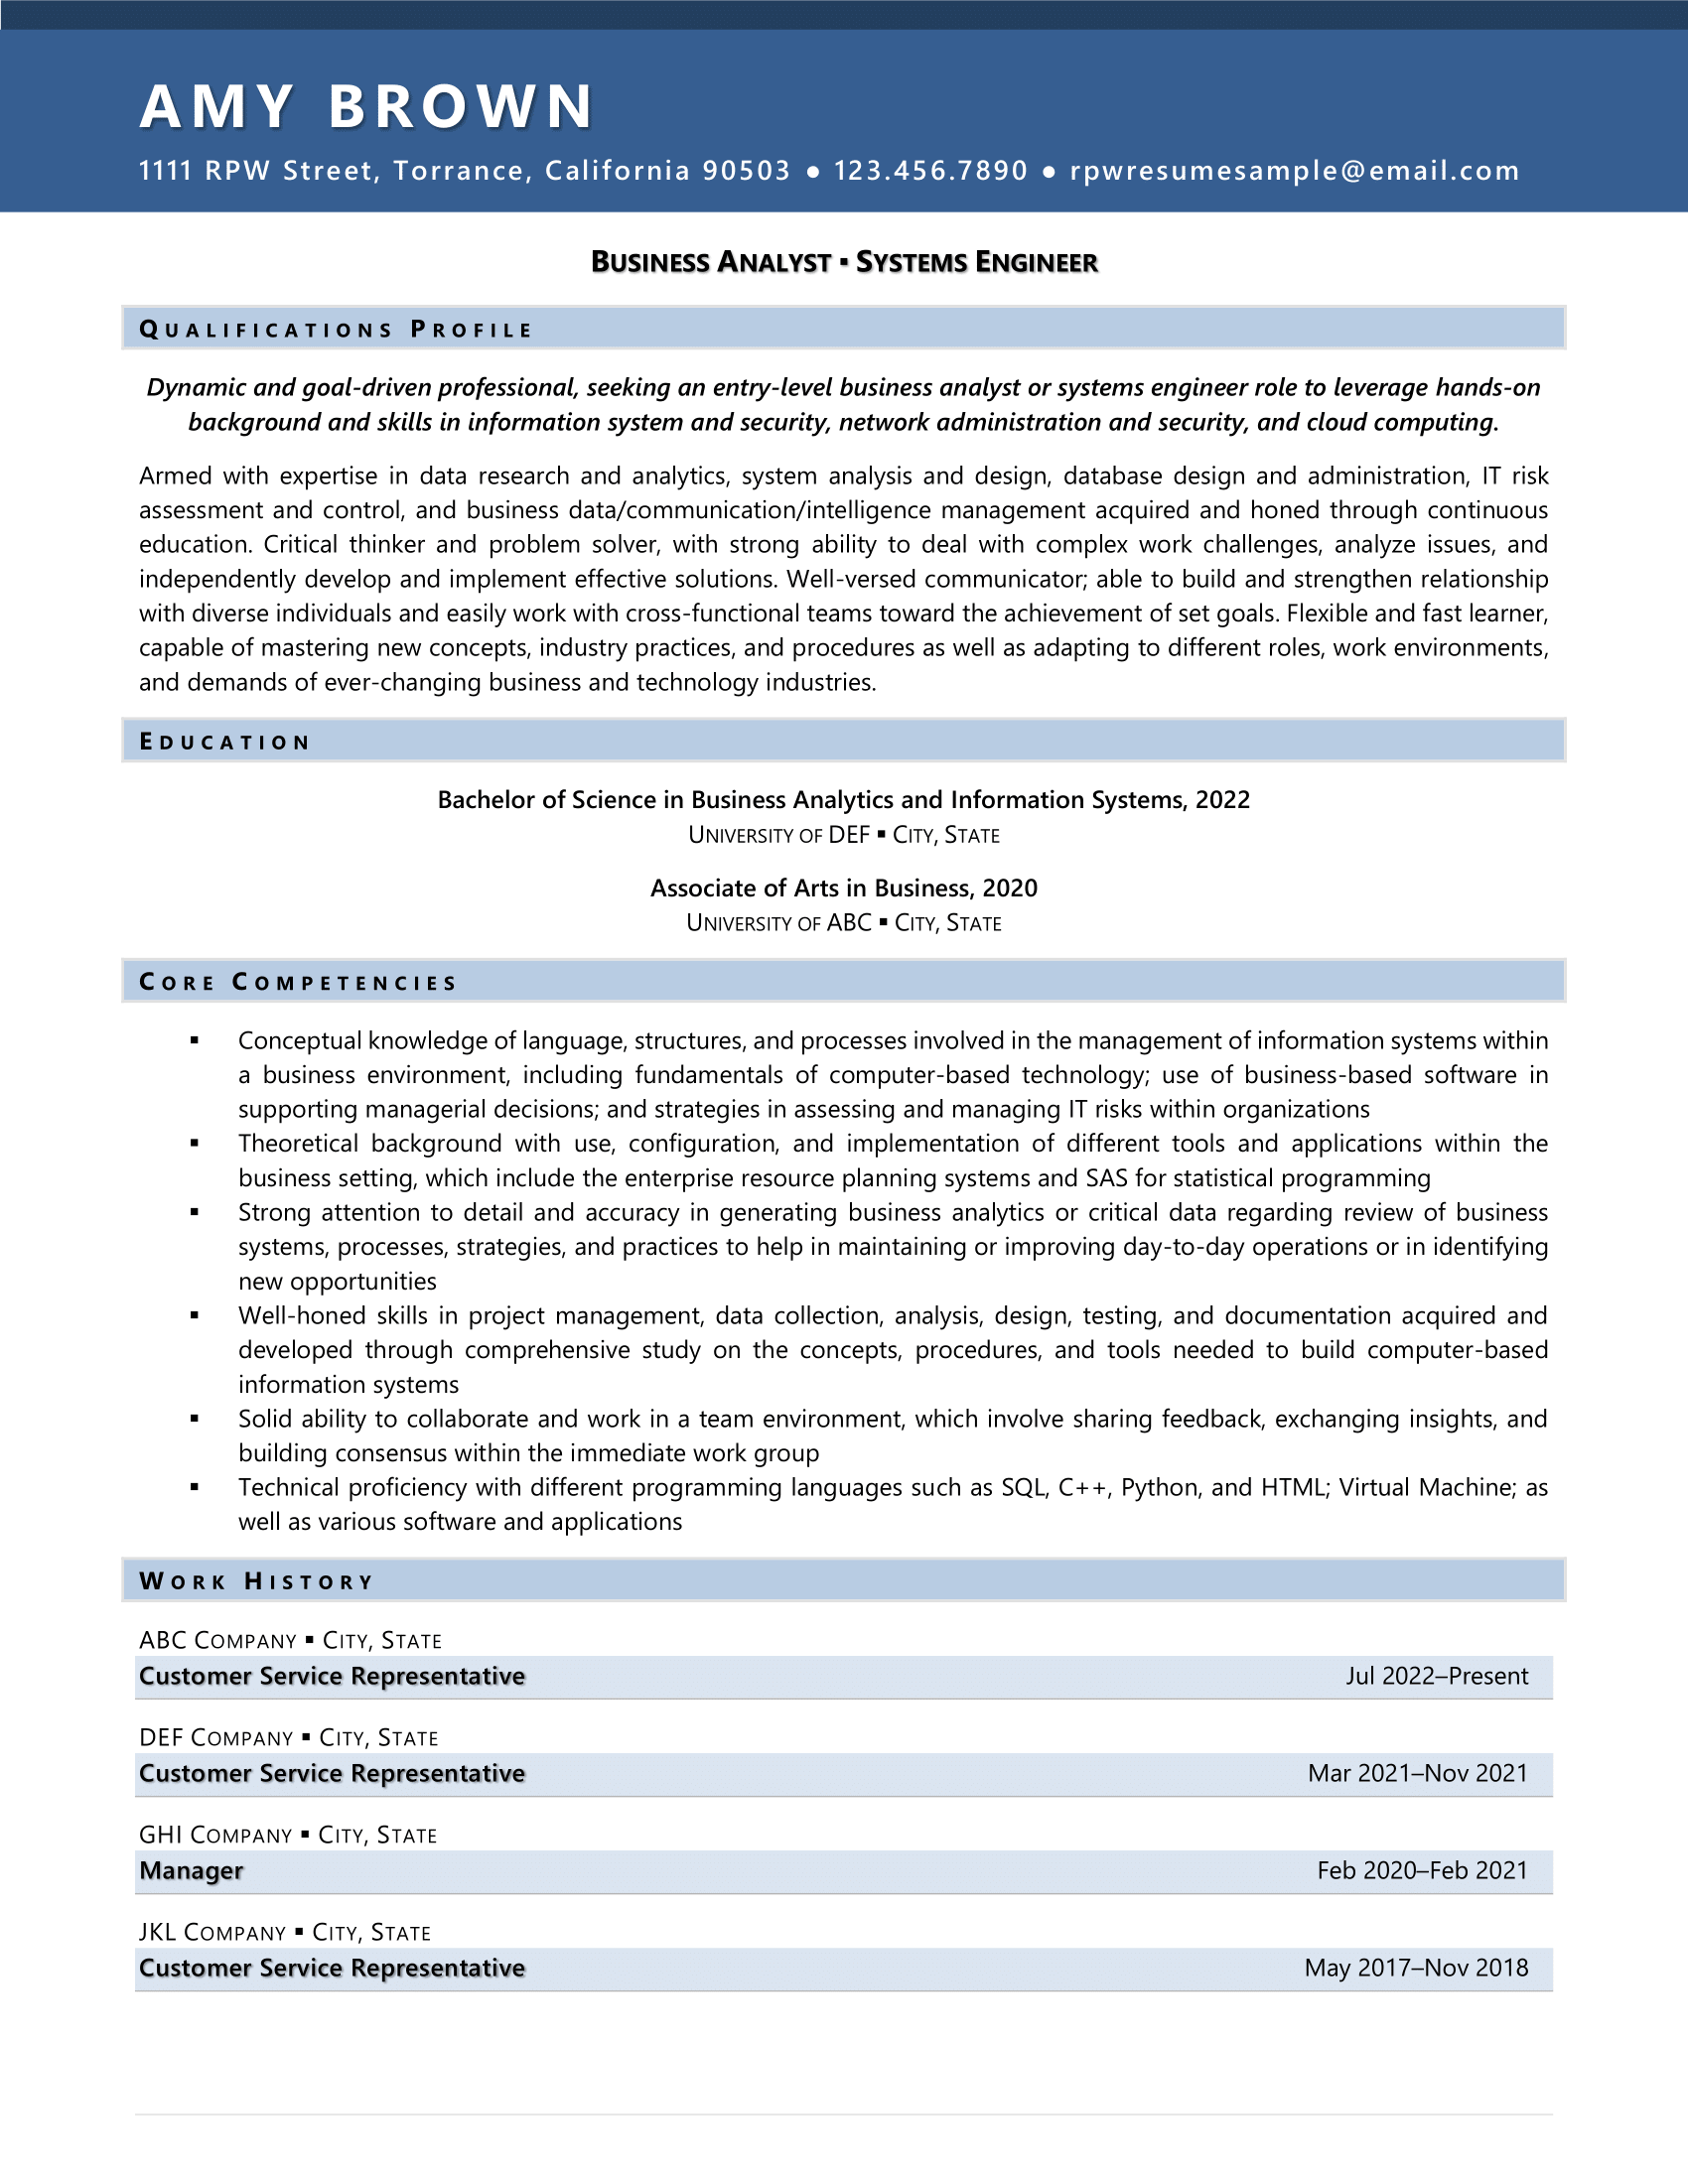 Resume Professional Writers Resume Example For Career Changers